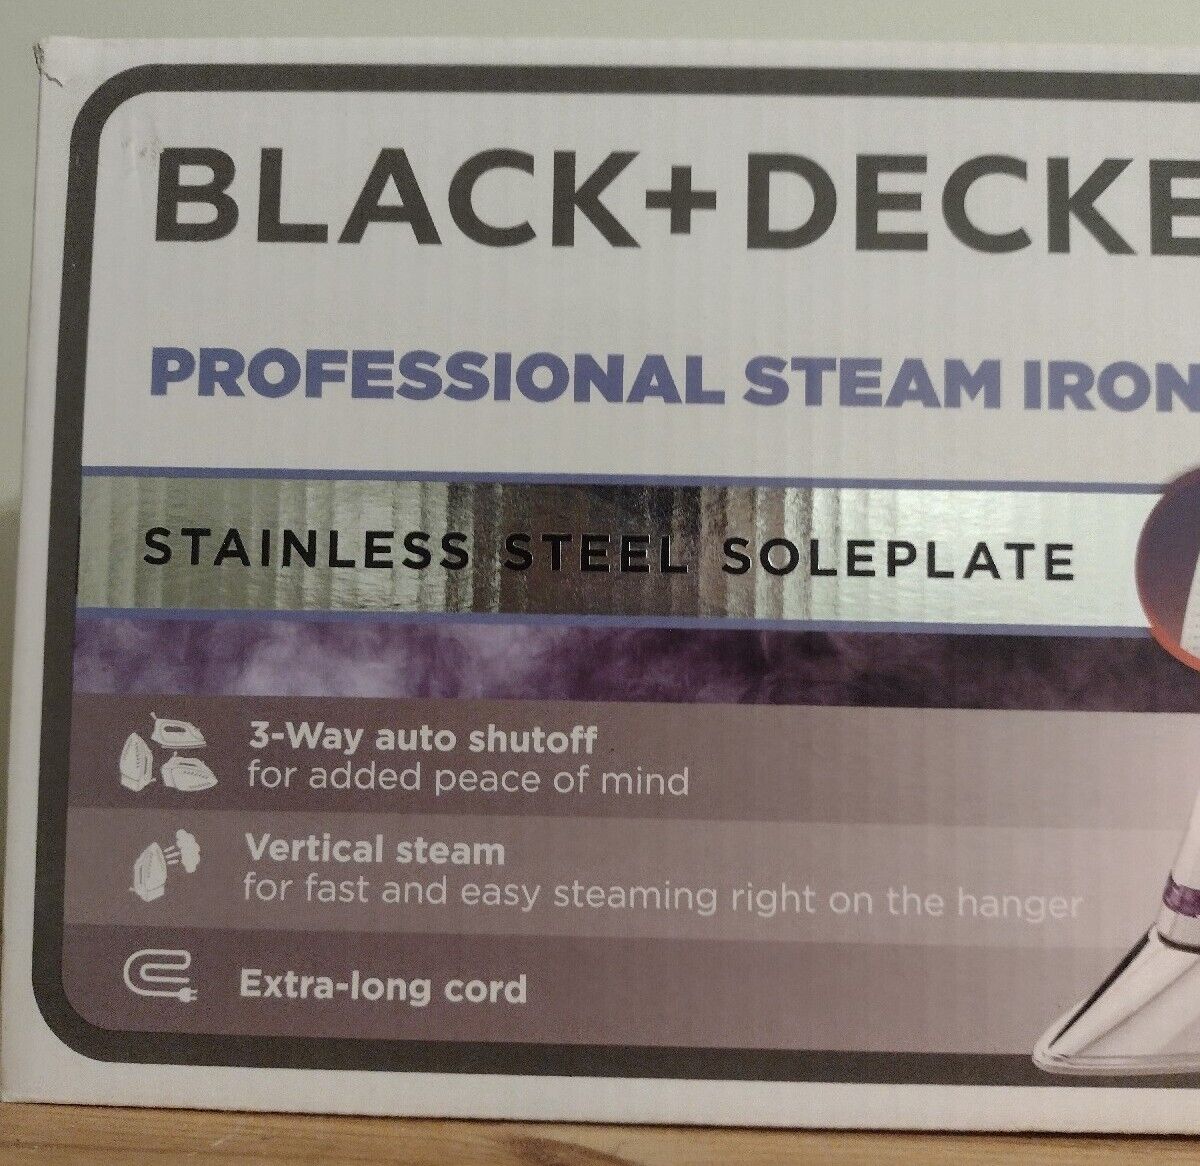 BLACK+DECKER IR1350S Professional Steam Iron with Stainless Steel Soleplate  and Extra-Long Cord, Purple